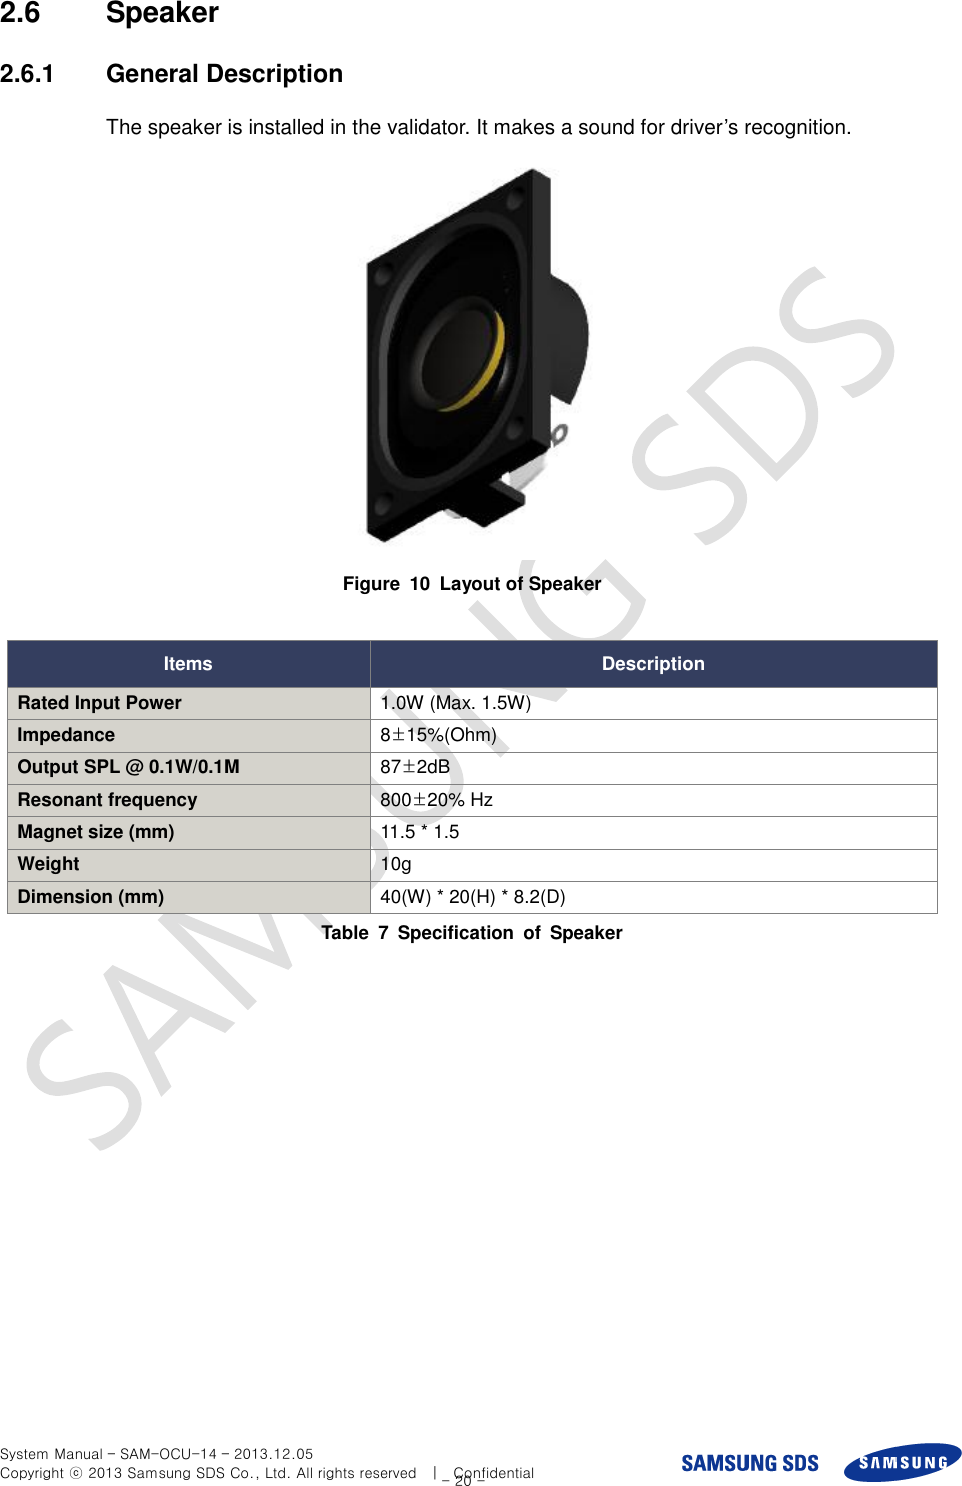  System Manual – SAM-OCU-14 – 2013.12.05 Copyright ⓒ 2013 Samsung SDS Co., Ltd. All rights reserved    |    Confidential - 20 - 2.6  Speaker 2.6.1  General Description The speaker is installed in the validator. It makes a sound for driver’s recognition.  Figure  10  Layout of Speaker  Items Description Rated Input Power 1.0W (Max. 1.5W) Impedance 8±15%(Ohm) Output SPL @ 0.1W/0.1M 87±2dB Resonant frequency 800±20% Hz Magnet size (mm) 11.5 * 1.5 Weight 10g Dimension (mm) 40(W) * 20(H) * 8.2(D) Table  7  Specification  of  Speaker  